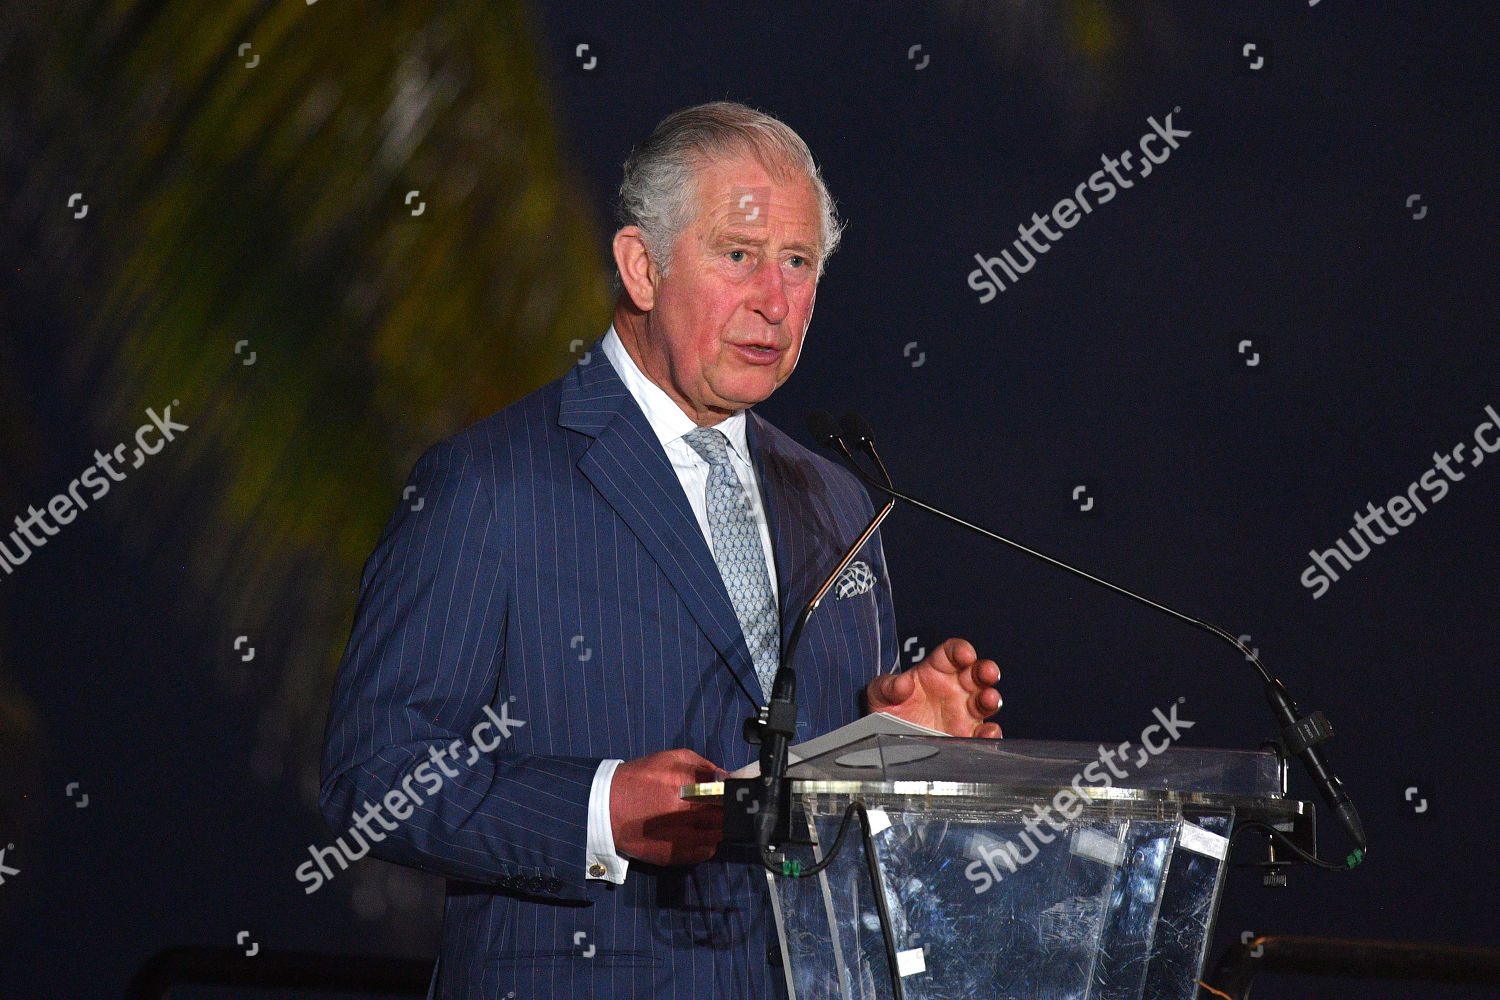 prince-charles-and-camilla-duchess-of-cornwall-caribbean-tour-cayman-islands-shutterstock-editorial-10180820dh.jpg